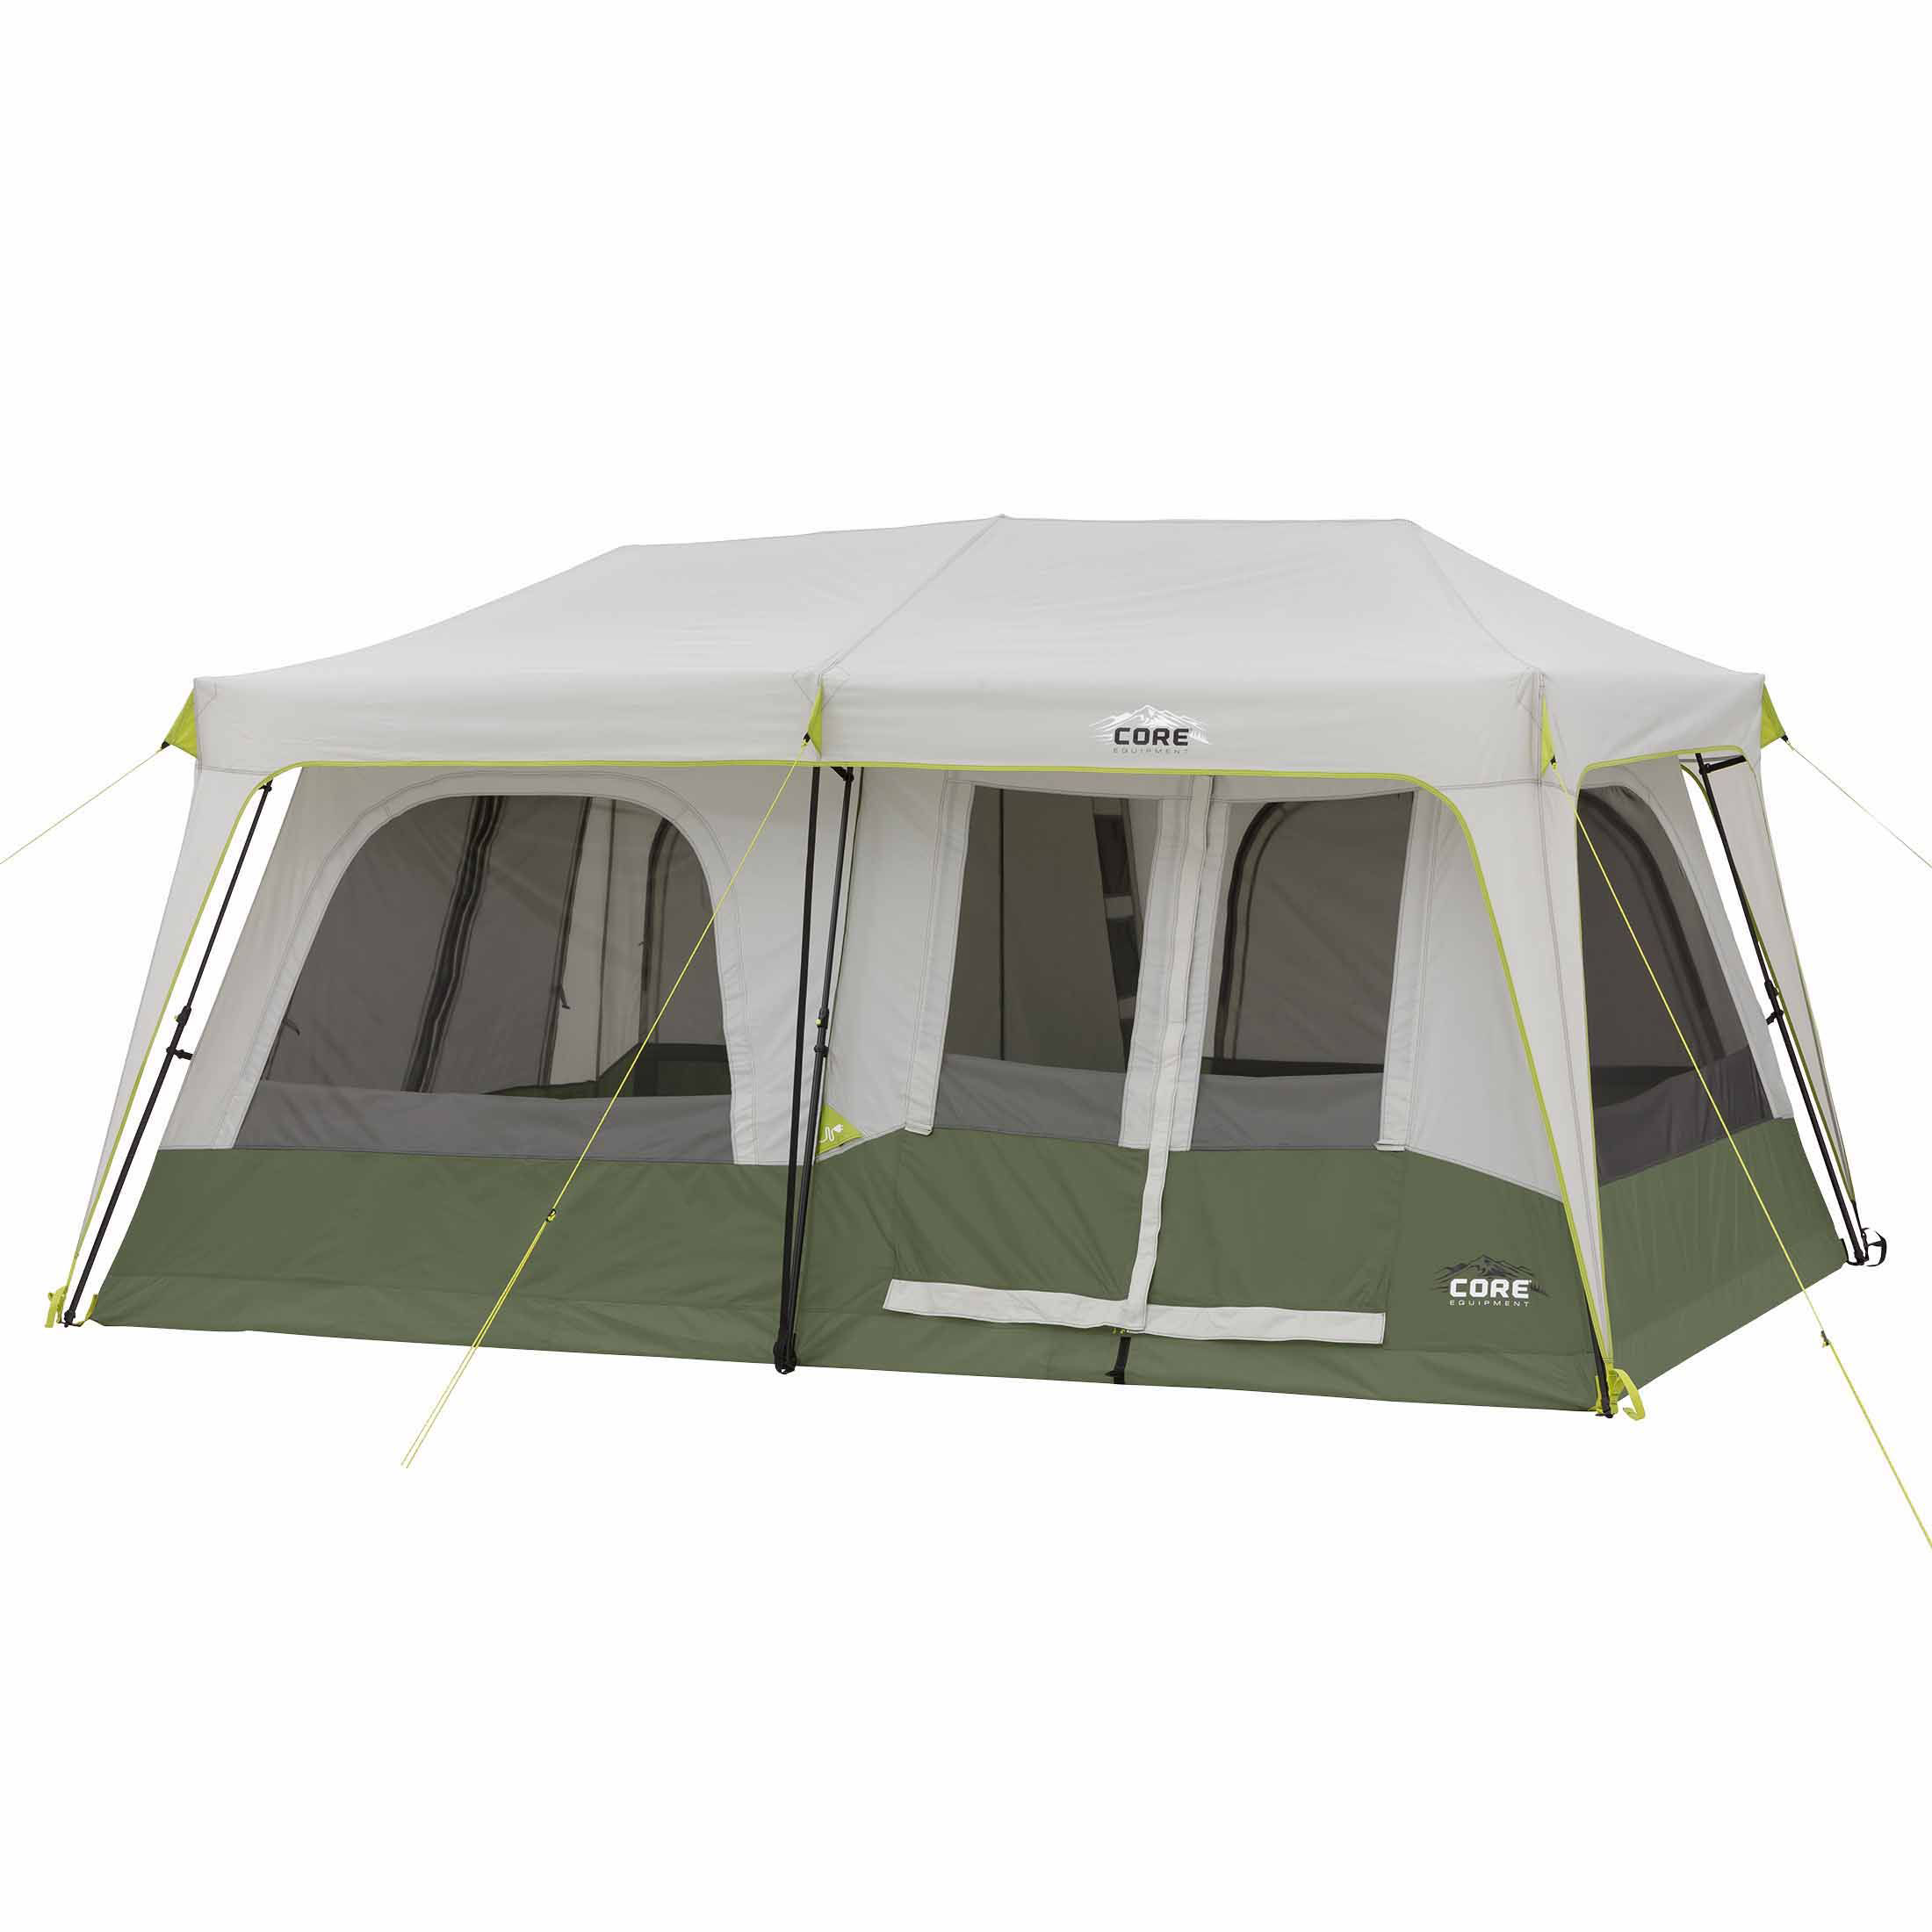 Core Equipment 8-Person Instant Cabin Performance Tent